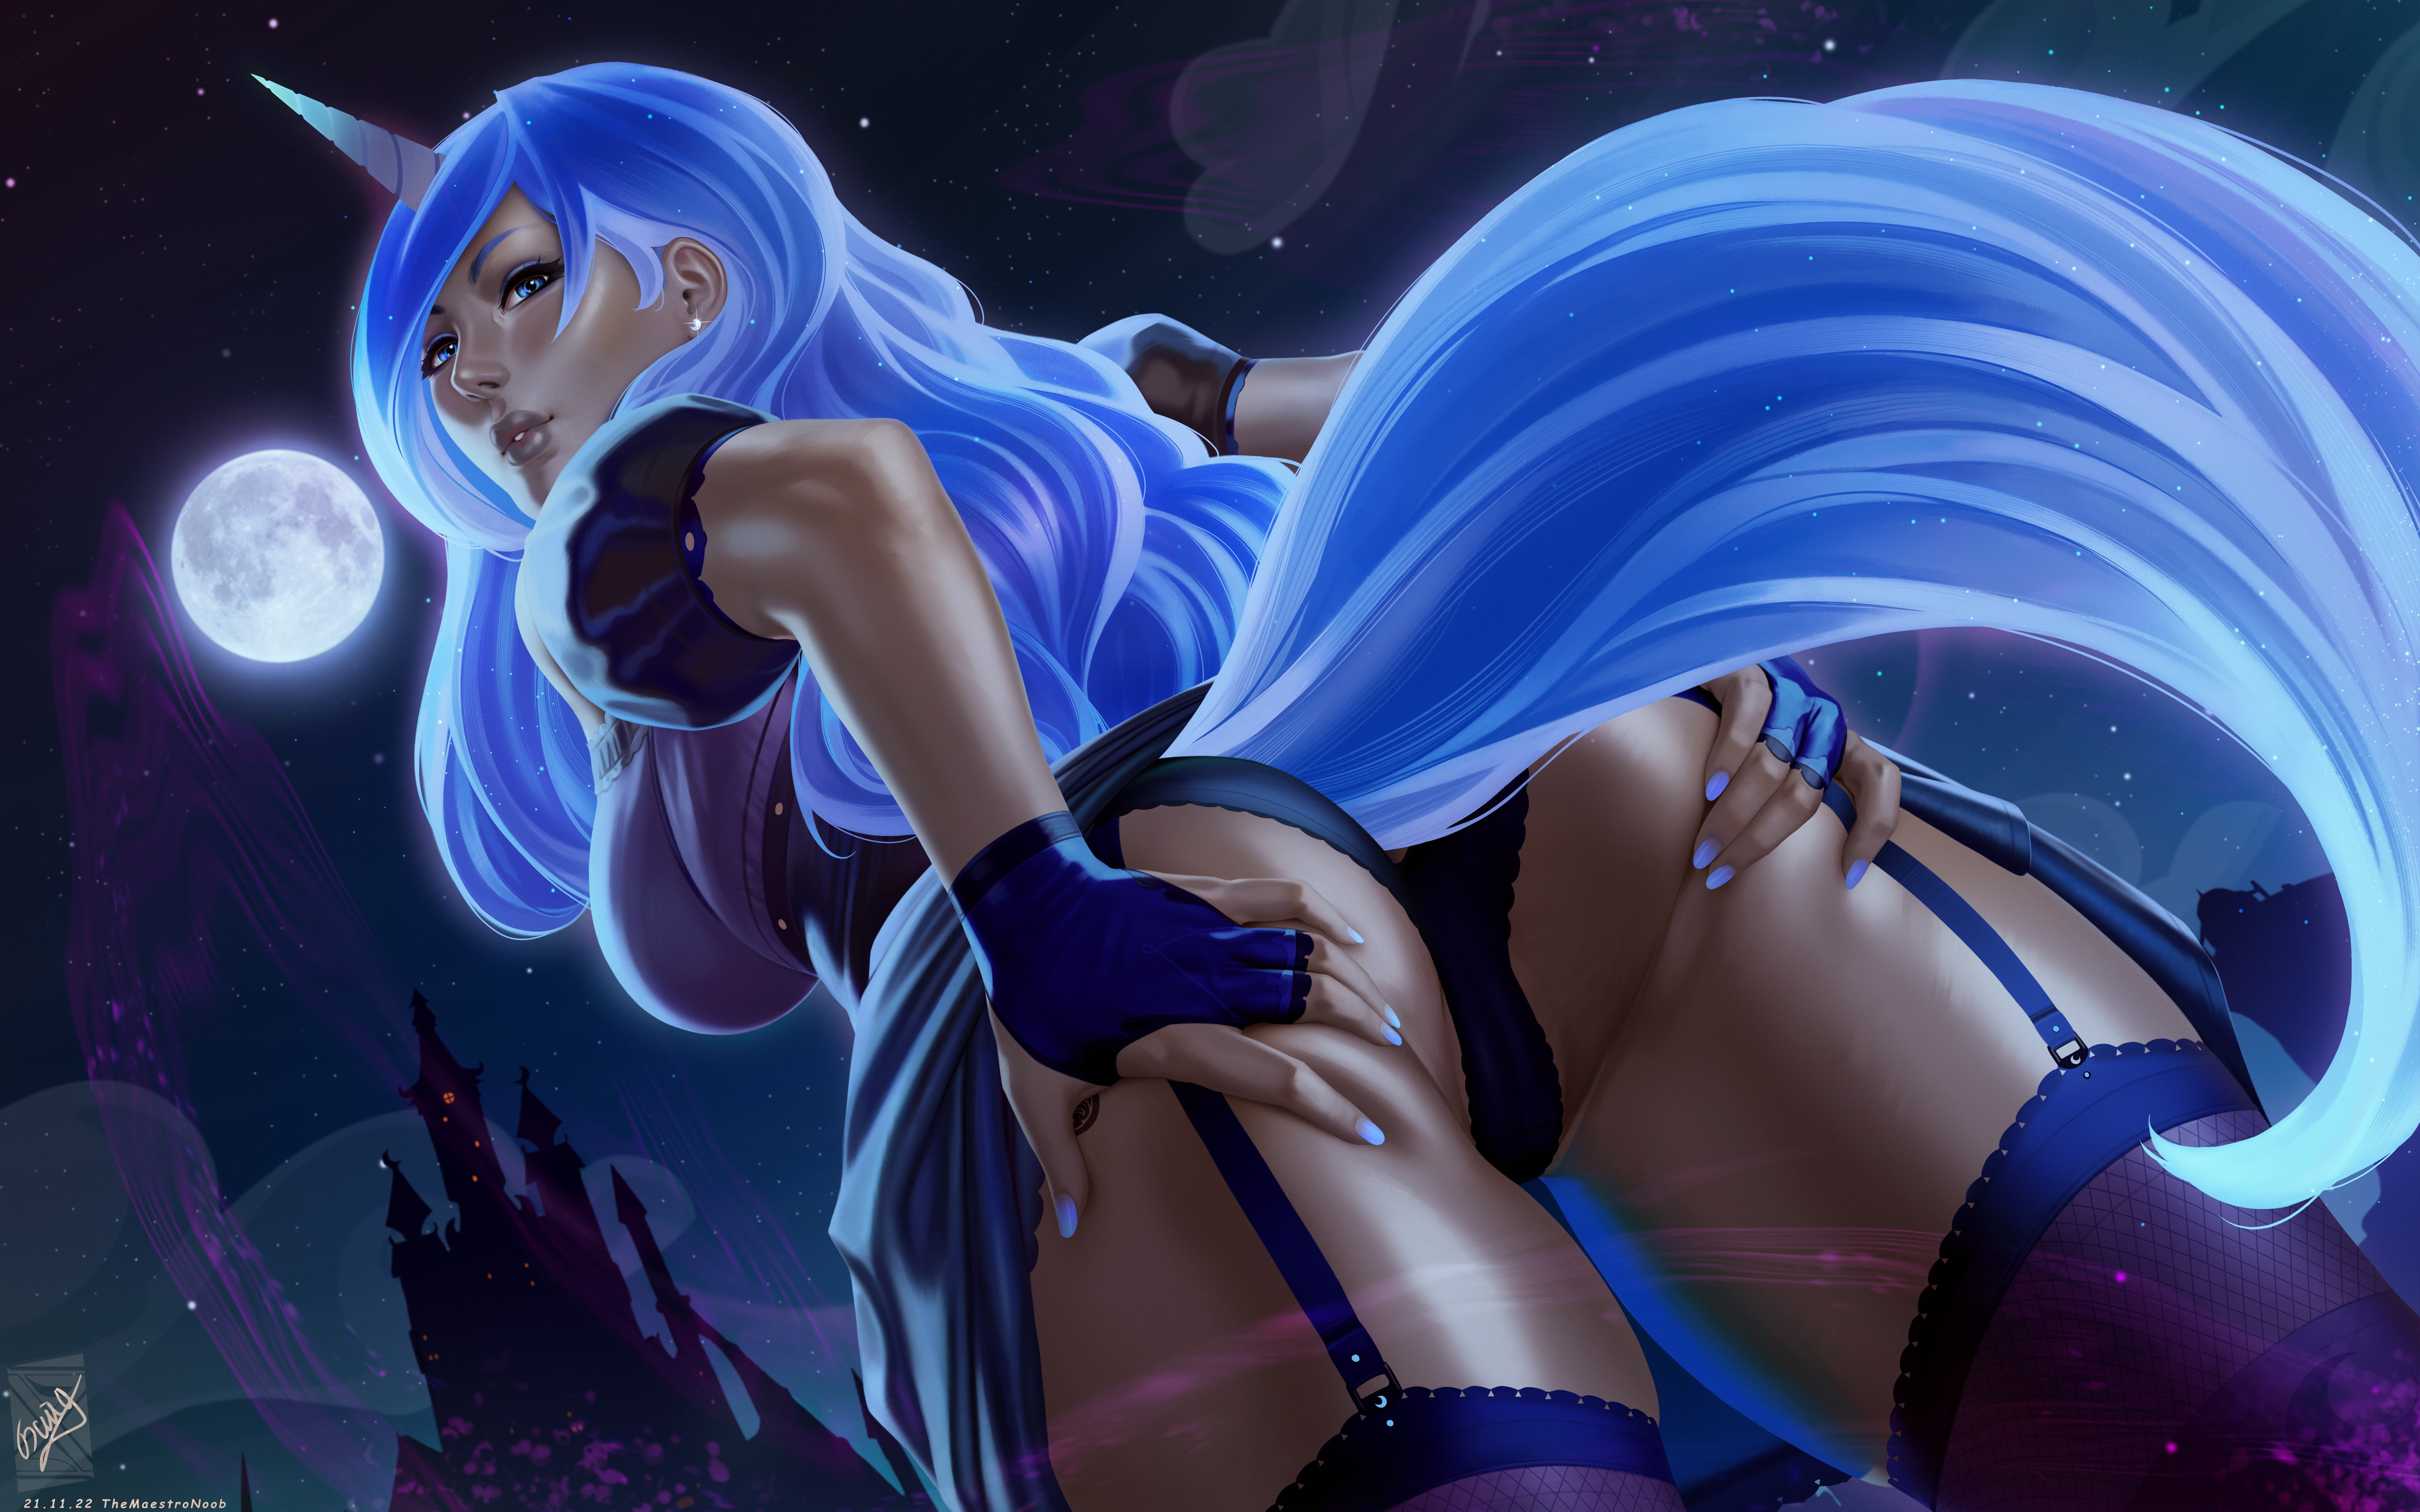 General 6000x3750 Princess Luna My Little Pony fictional character fantasy girl humanized low-angle ass lingerie 2D artwork drawing fan art TheMaestroNoob dress lifting dress lifting clothes underwear panties garter straps straps stockings booty scoop blue hair blue eyes Moon horns